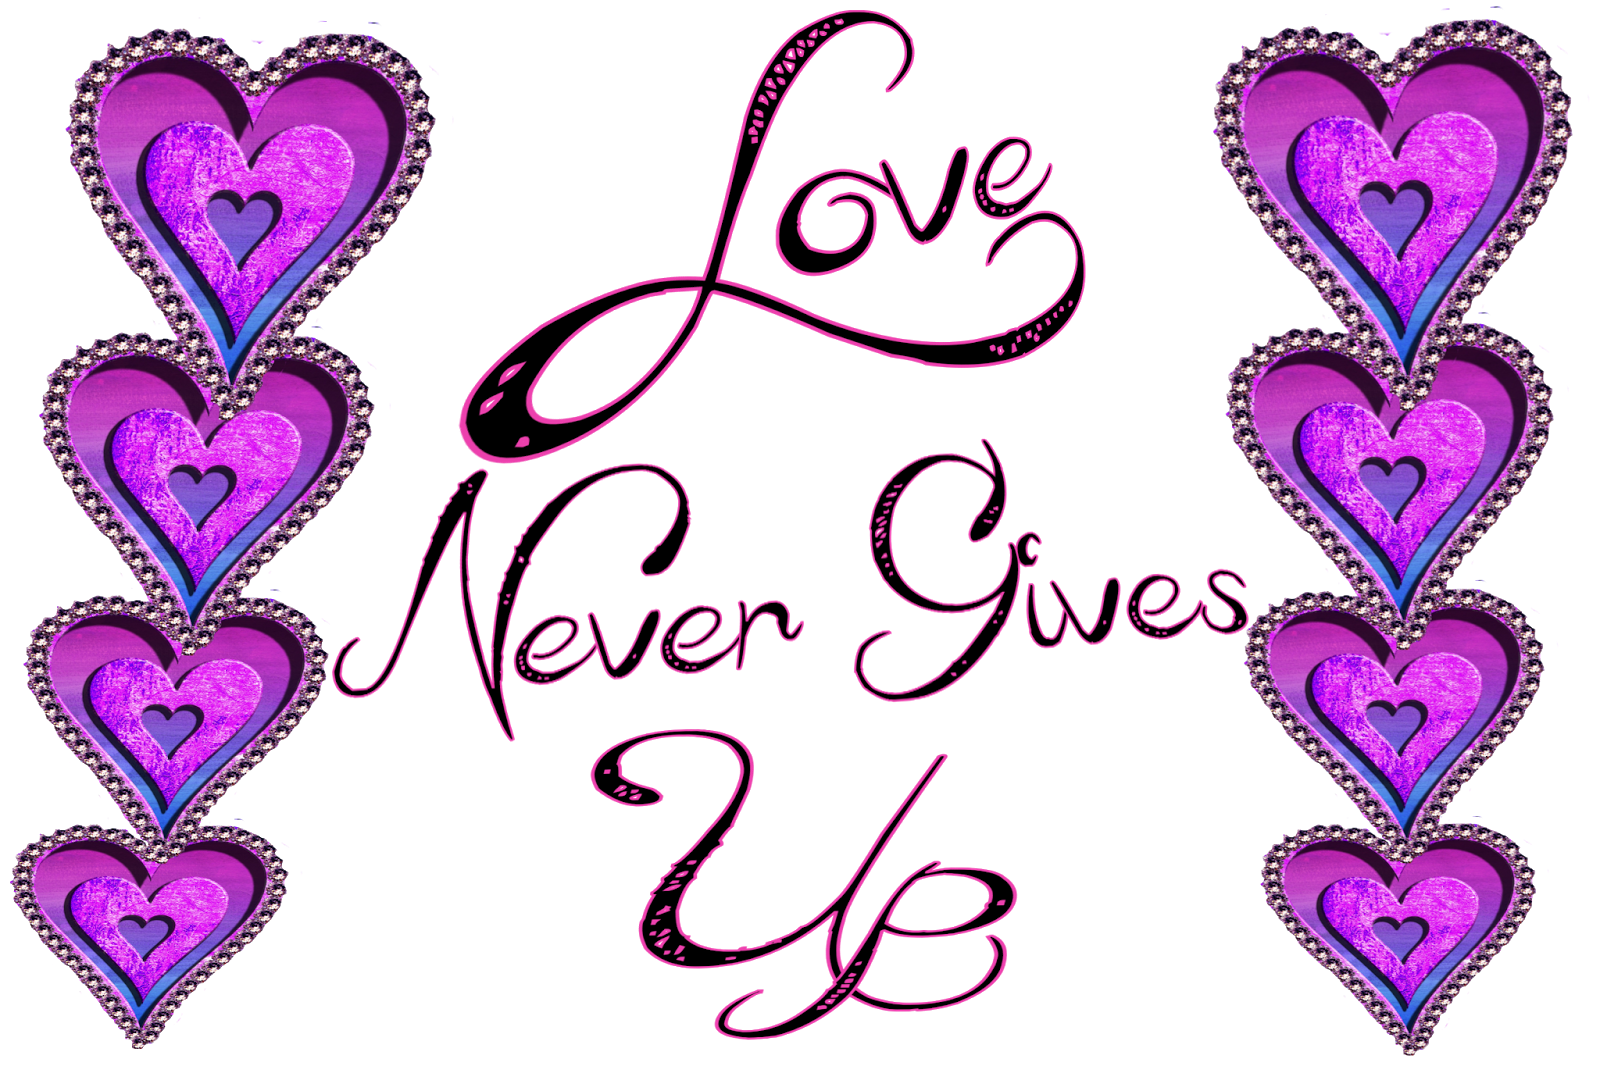 Christian Images In My Treasure Box: Love Never Gives Up
